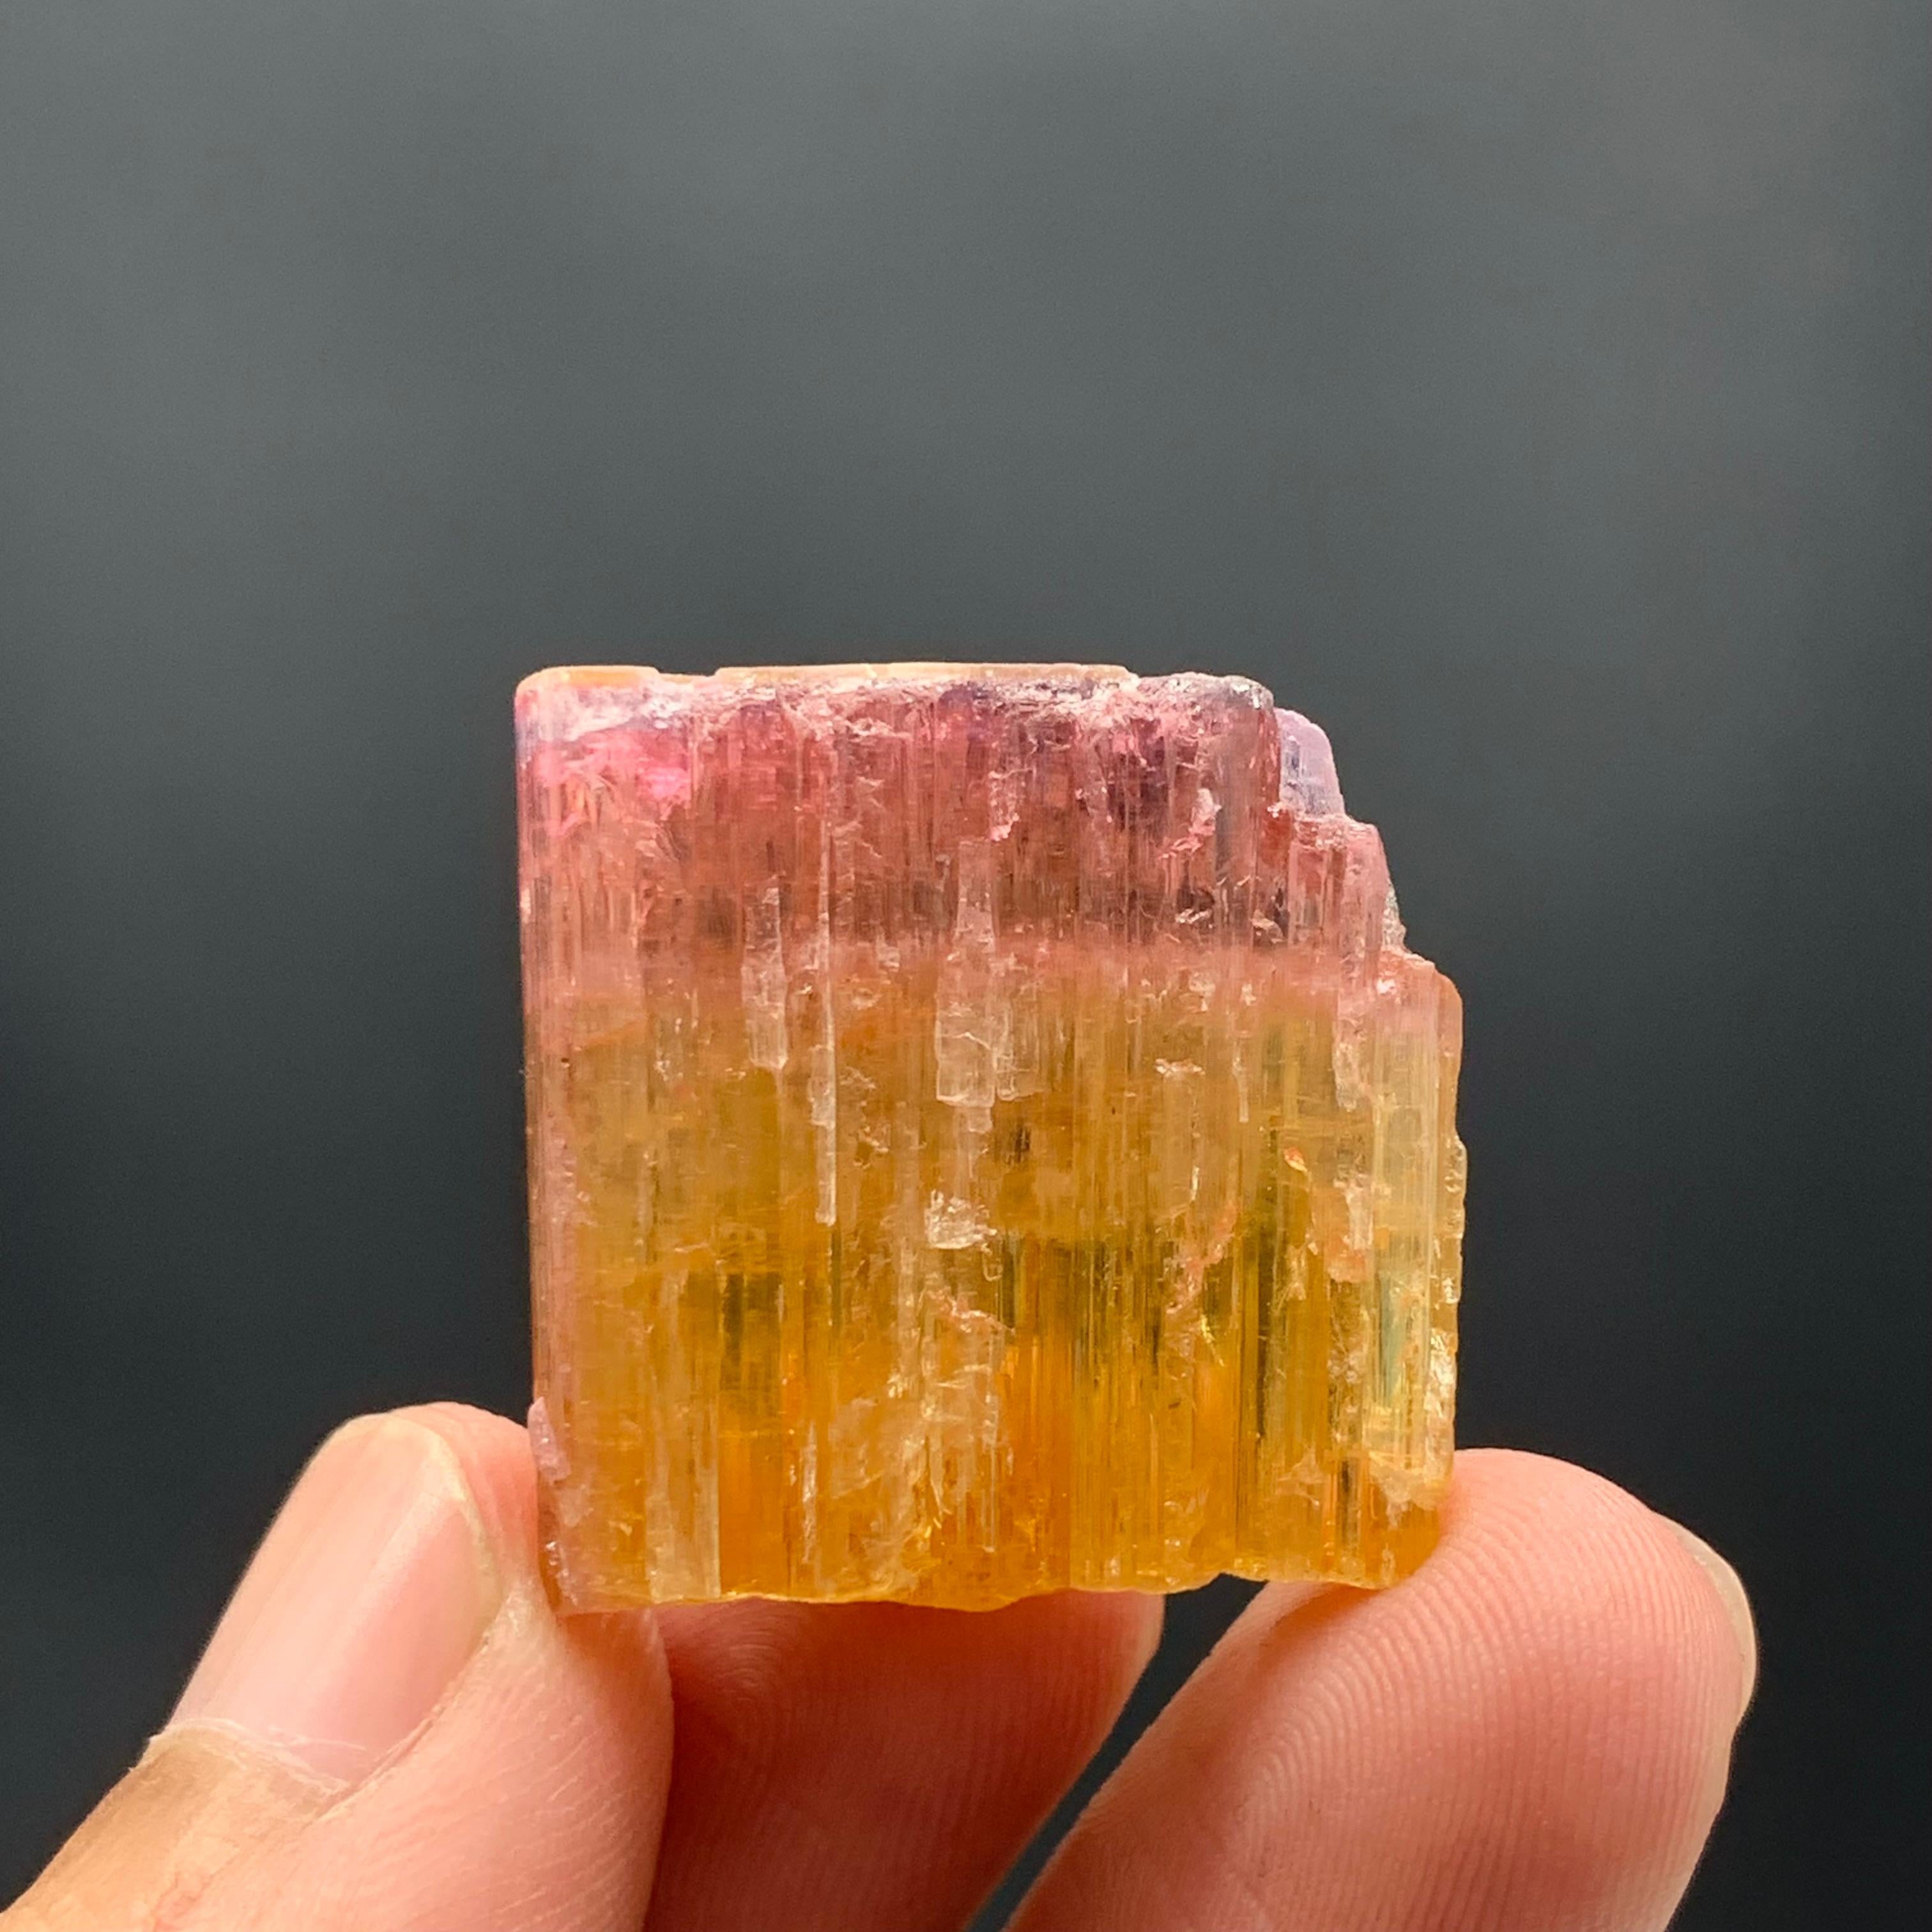 Rock Crystal 59.15 Carat Beautiful Bi Color Tourmaline Crystal From Paprook Mine, Afghanistan For Sale